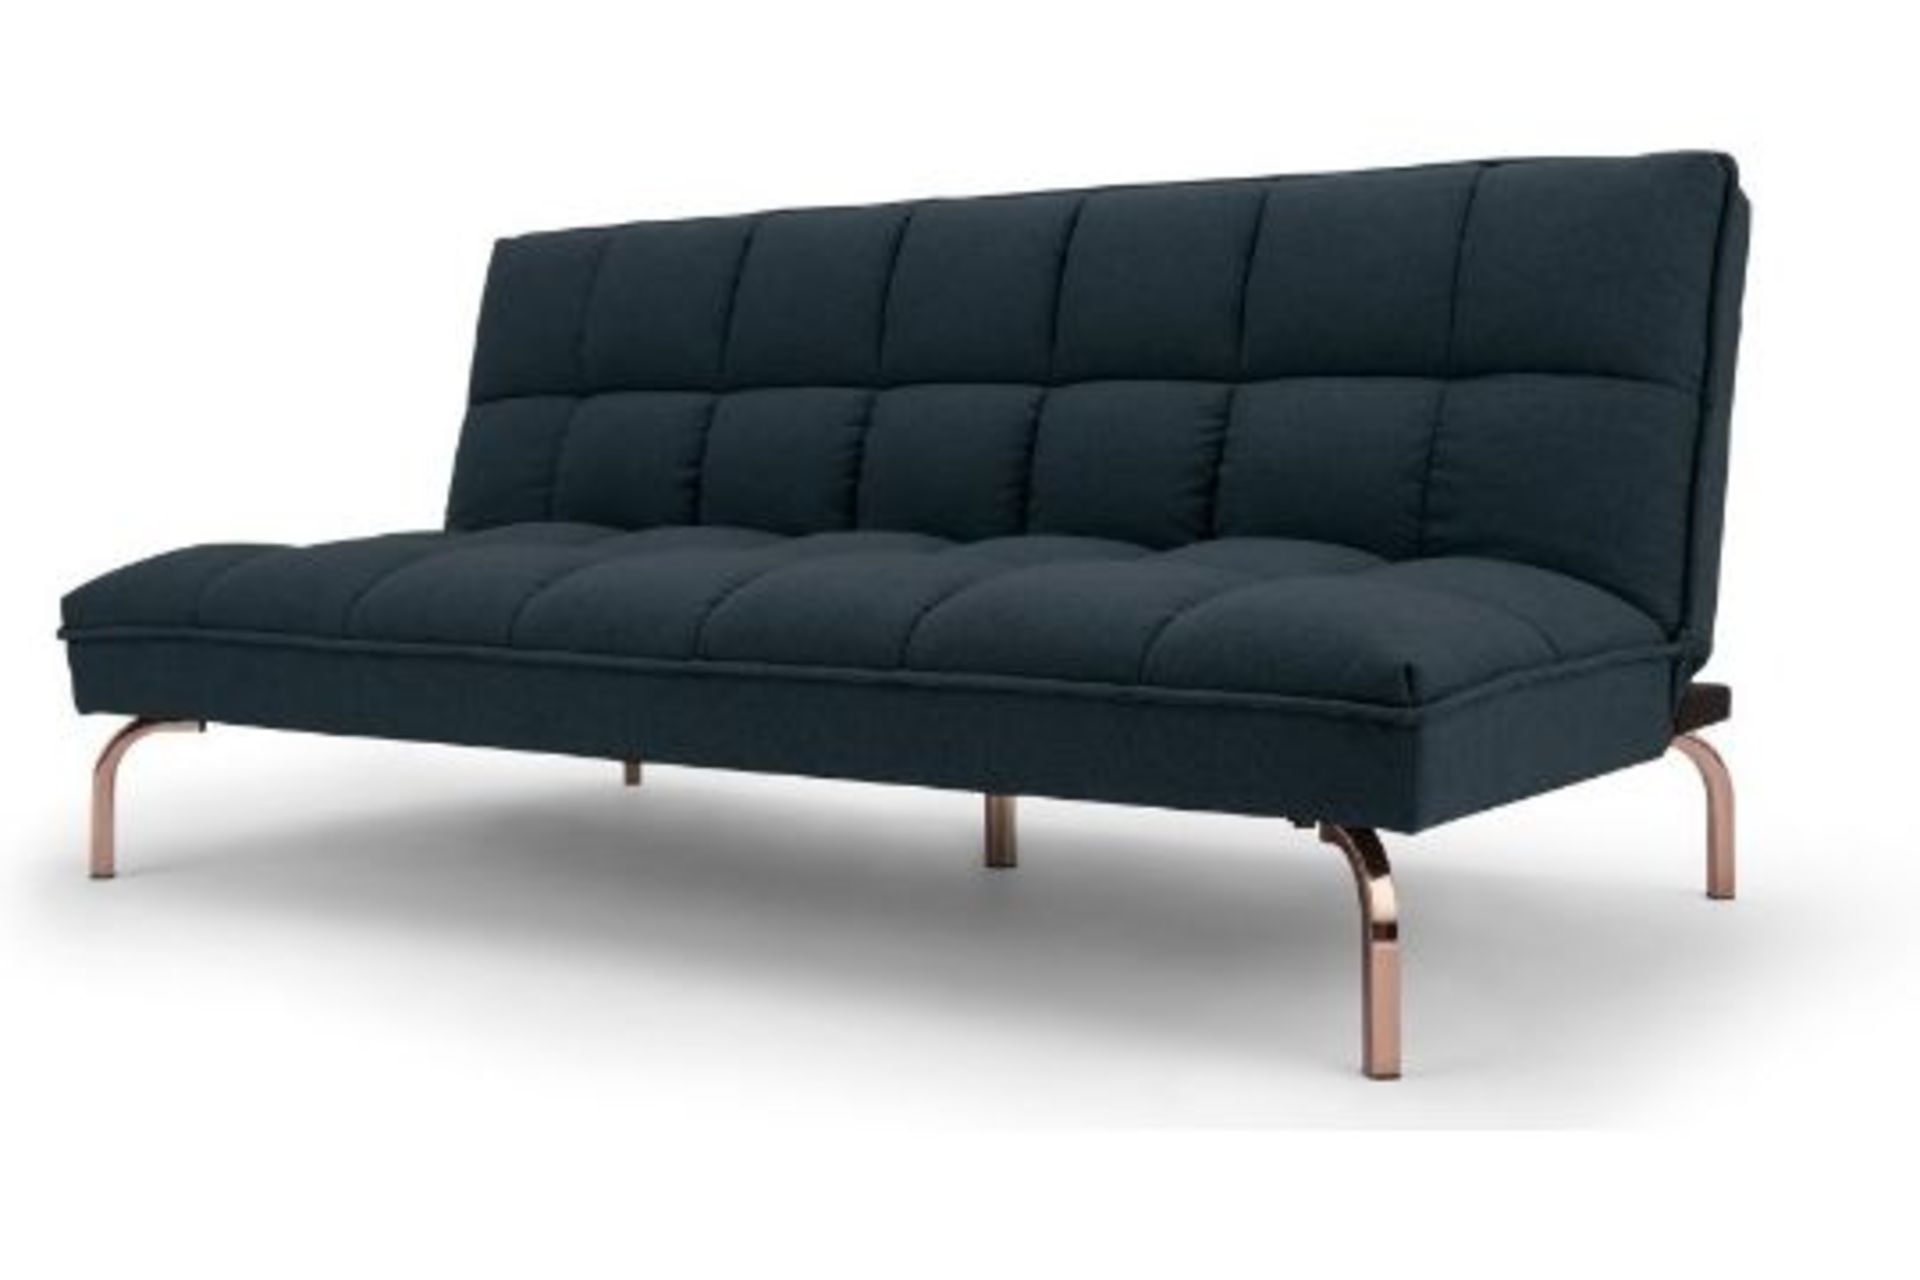 New & Boxed Made.com Hallie Click Clack Sofa Bed. Aegean Blue with Copper Legs. RRP £1,449.